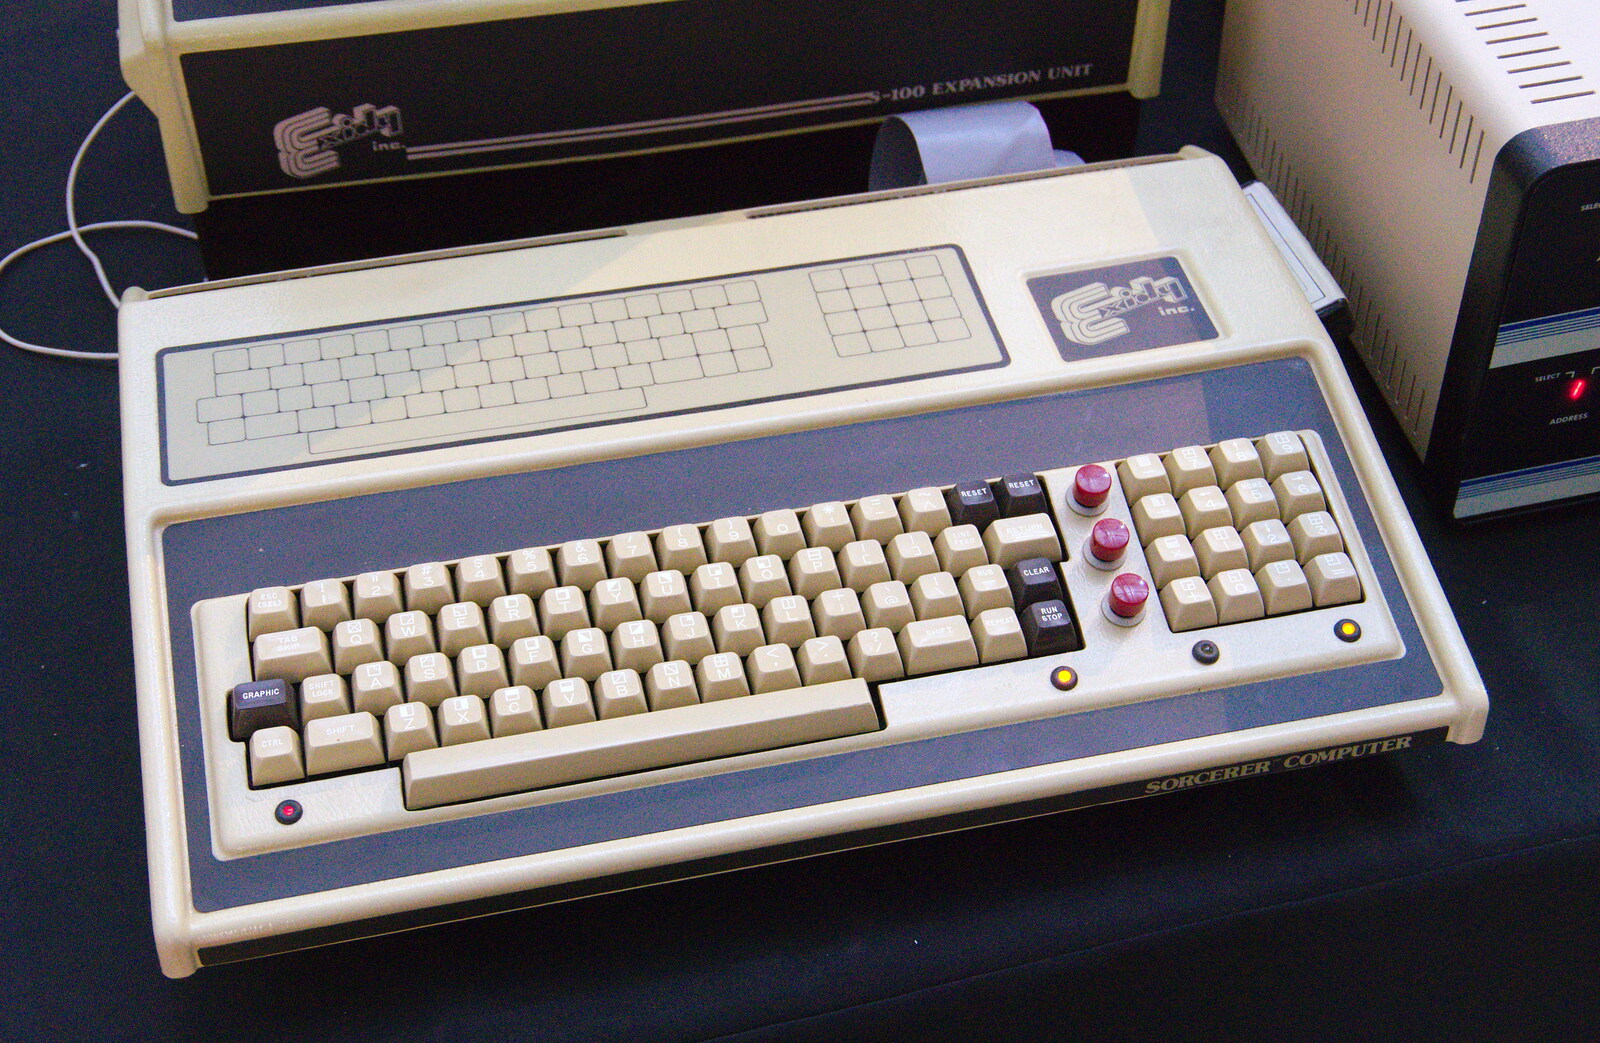 An Exidy Sourceror from The Retro Computer Festival, Centre For Computing History, Cambridge - 15th September 2018